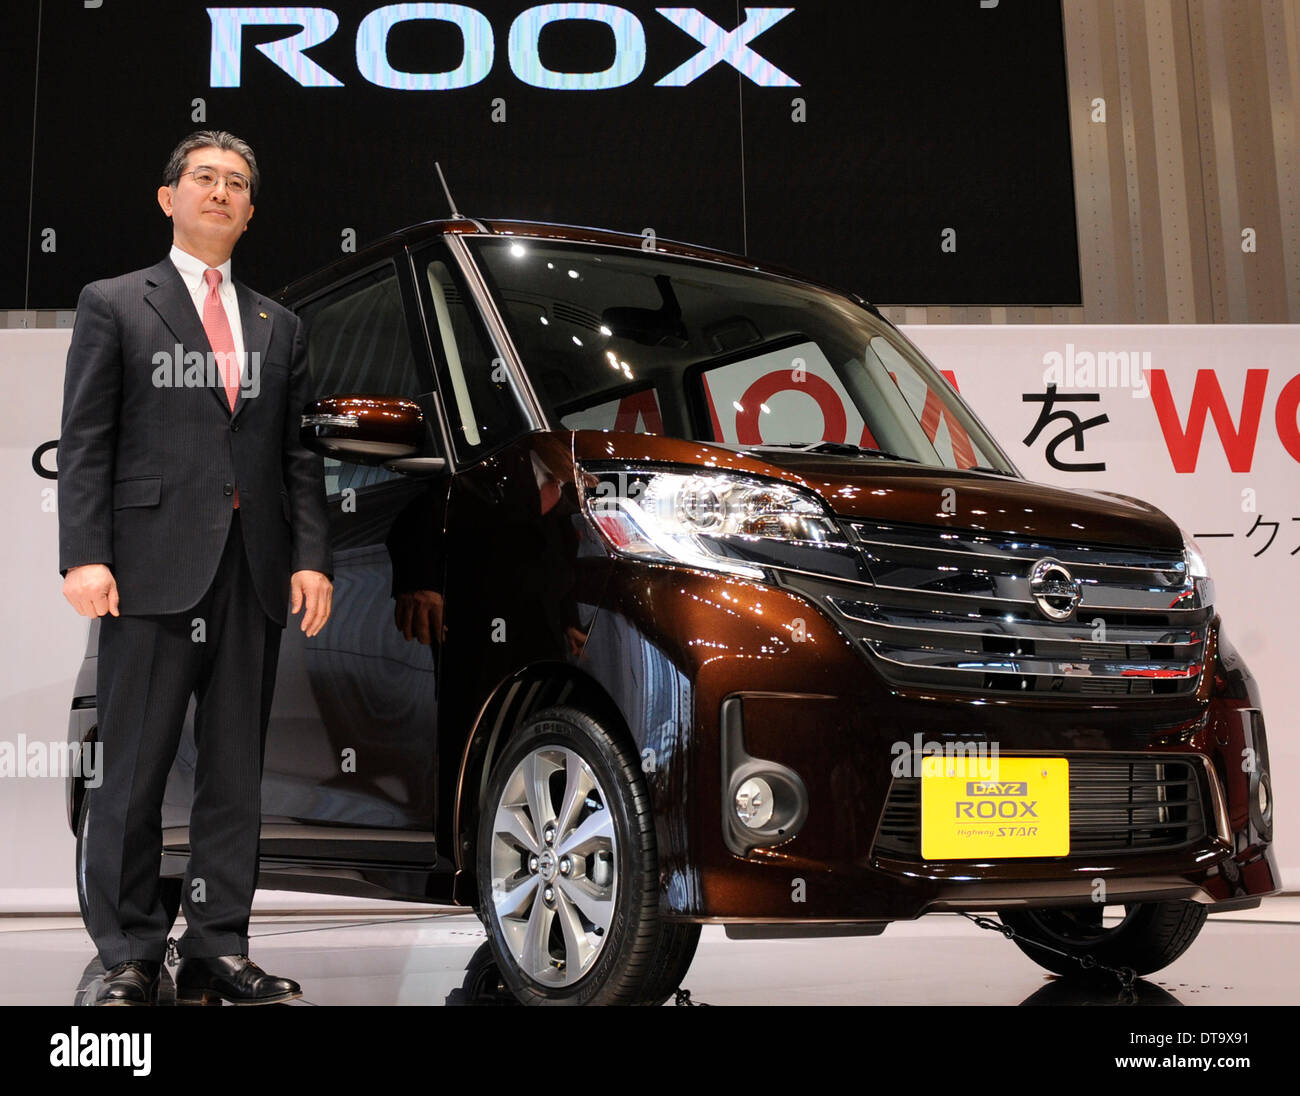 Yokohama, Japan. 13th Feb, 2014. Japan's auto giant Nissan's Vice President Takao Katagiri stands by Nissan's new model Dayz Roox at the headquarters of Nissan Motor in Yokohama, Japan, Feb. 13, 2014. Nissan's Dayz Roox was released on Thursday throughout Japan. © Stringer/Xinhua/Alamy Live News Stock Photo